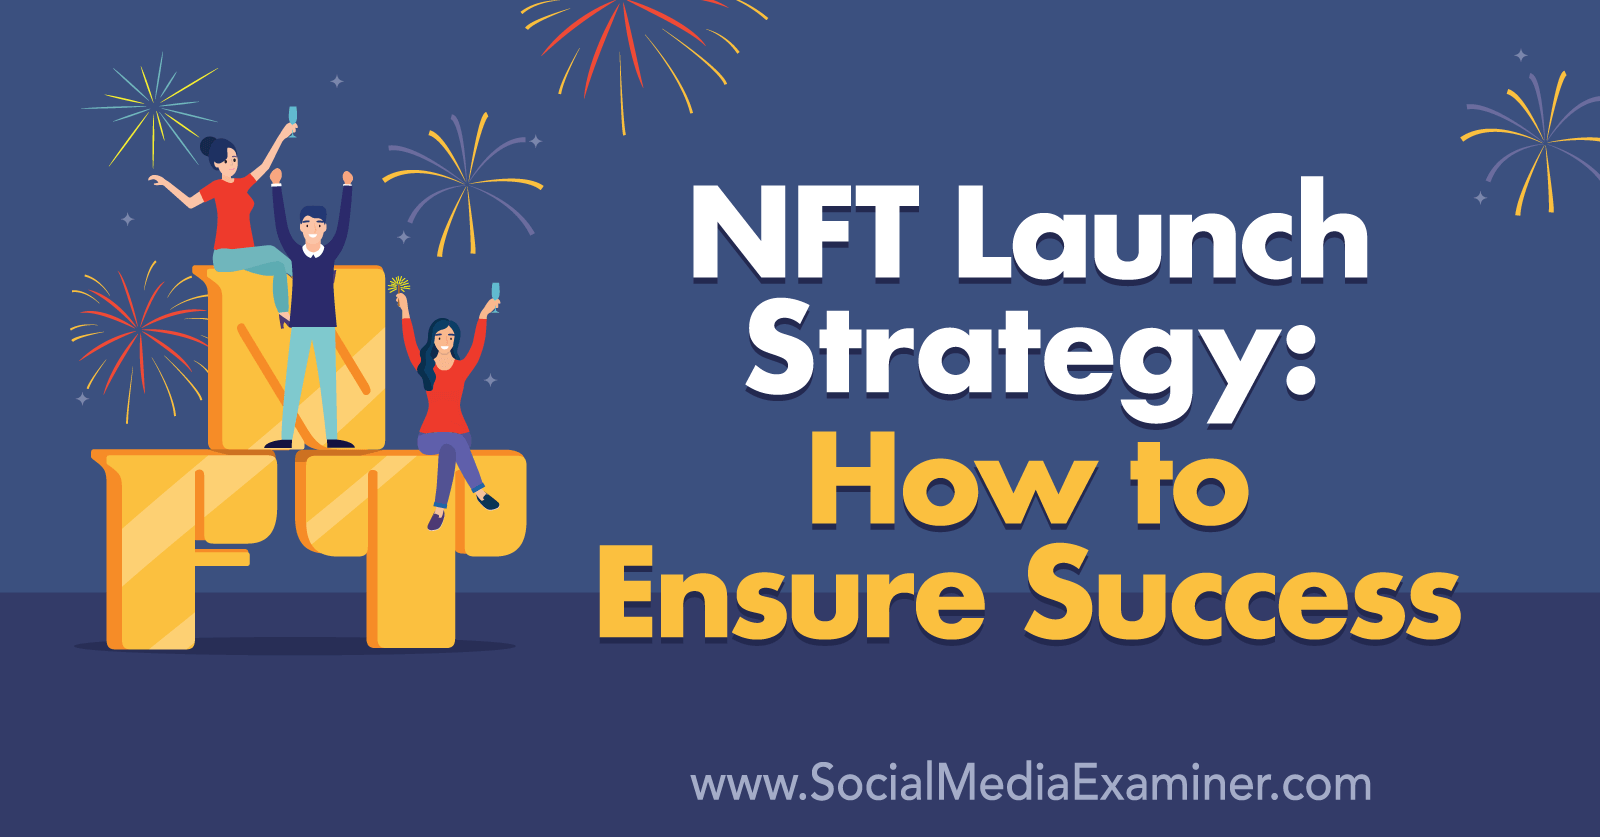 NFT Launch Strategy: How to Ensure Success featuring insights from Joel Comm on the Crypto Business Podcast.